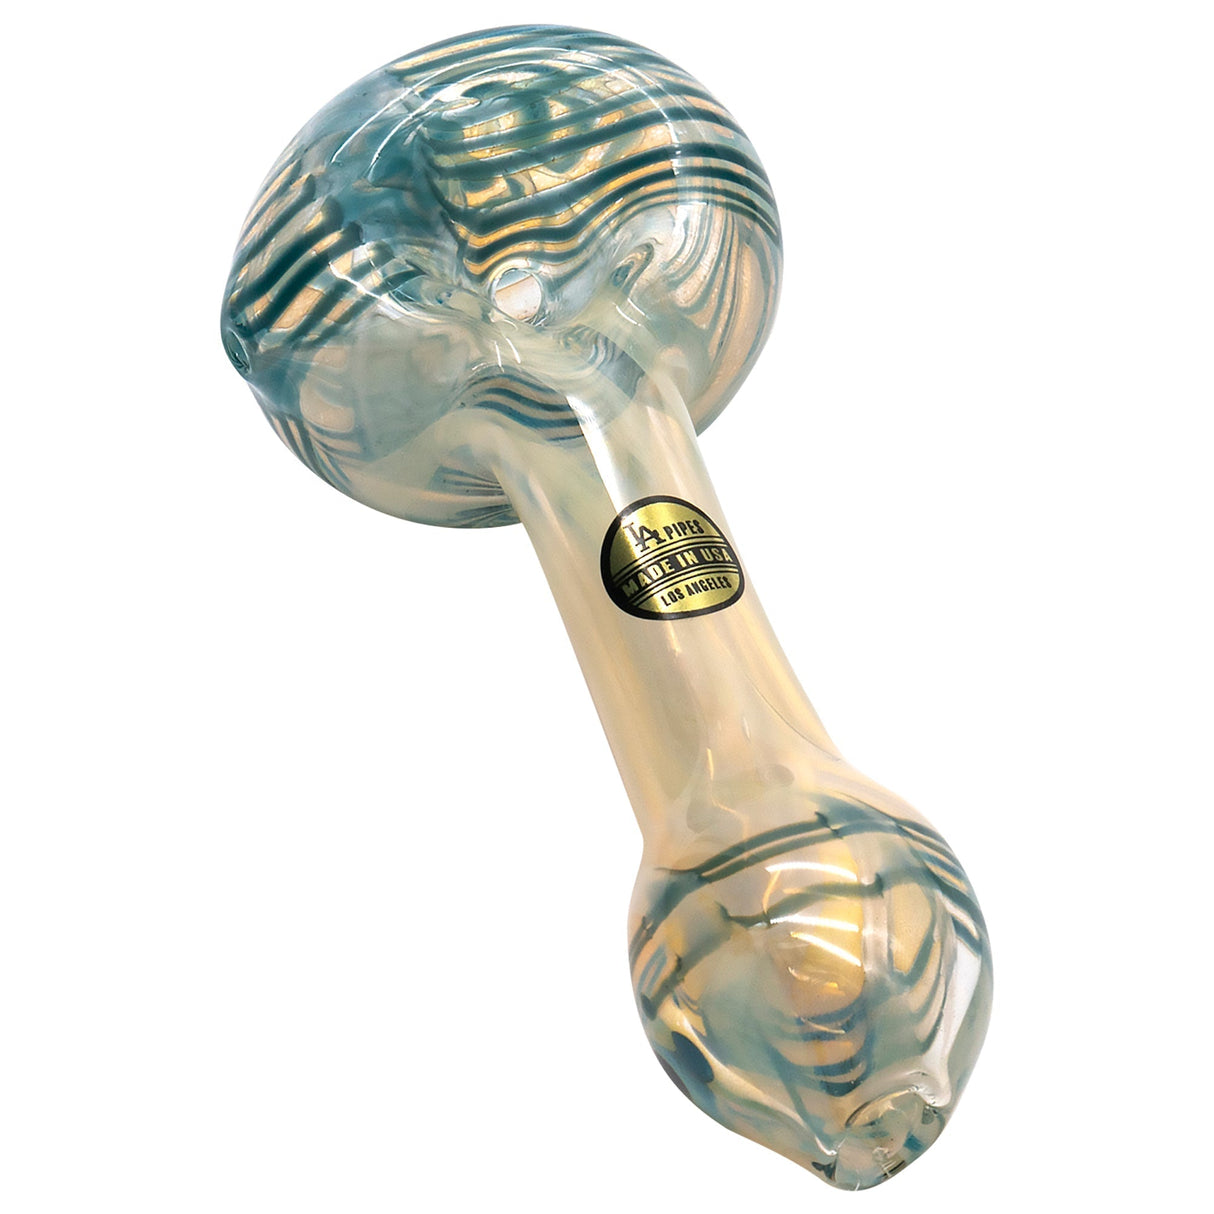 LA Pipes Spoon Hand Pipe in Fumed Color Changing Borosilicate Glass - Standard Size